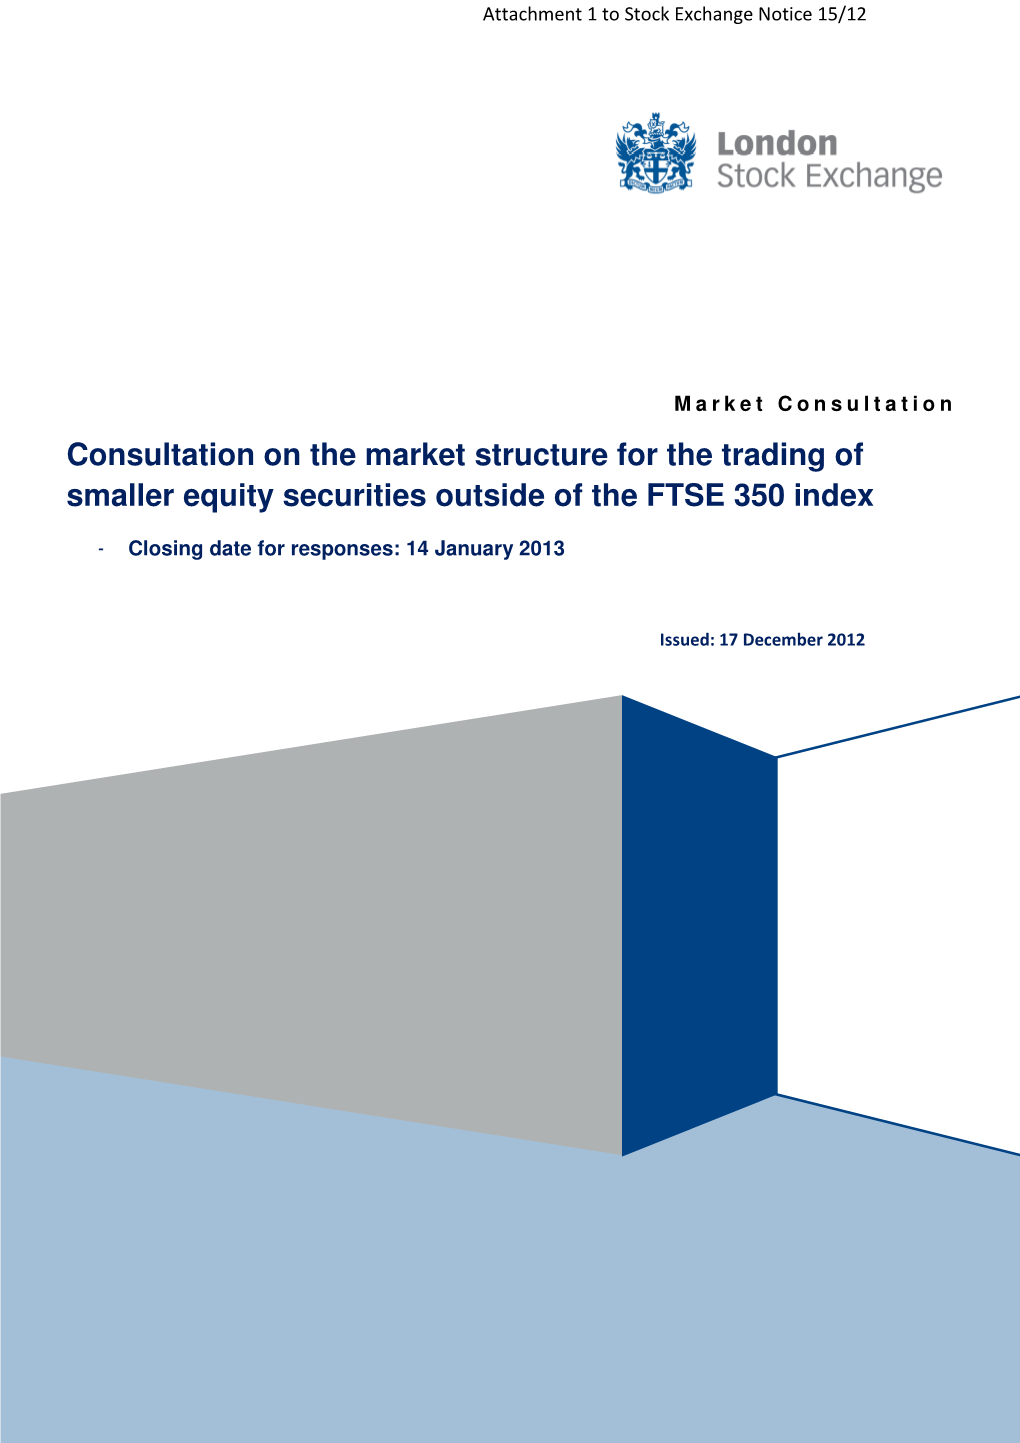 Consultation on the Market Structure for the Trading of Smaller Equity Securities Outside of the FTSE 350 Index